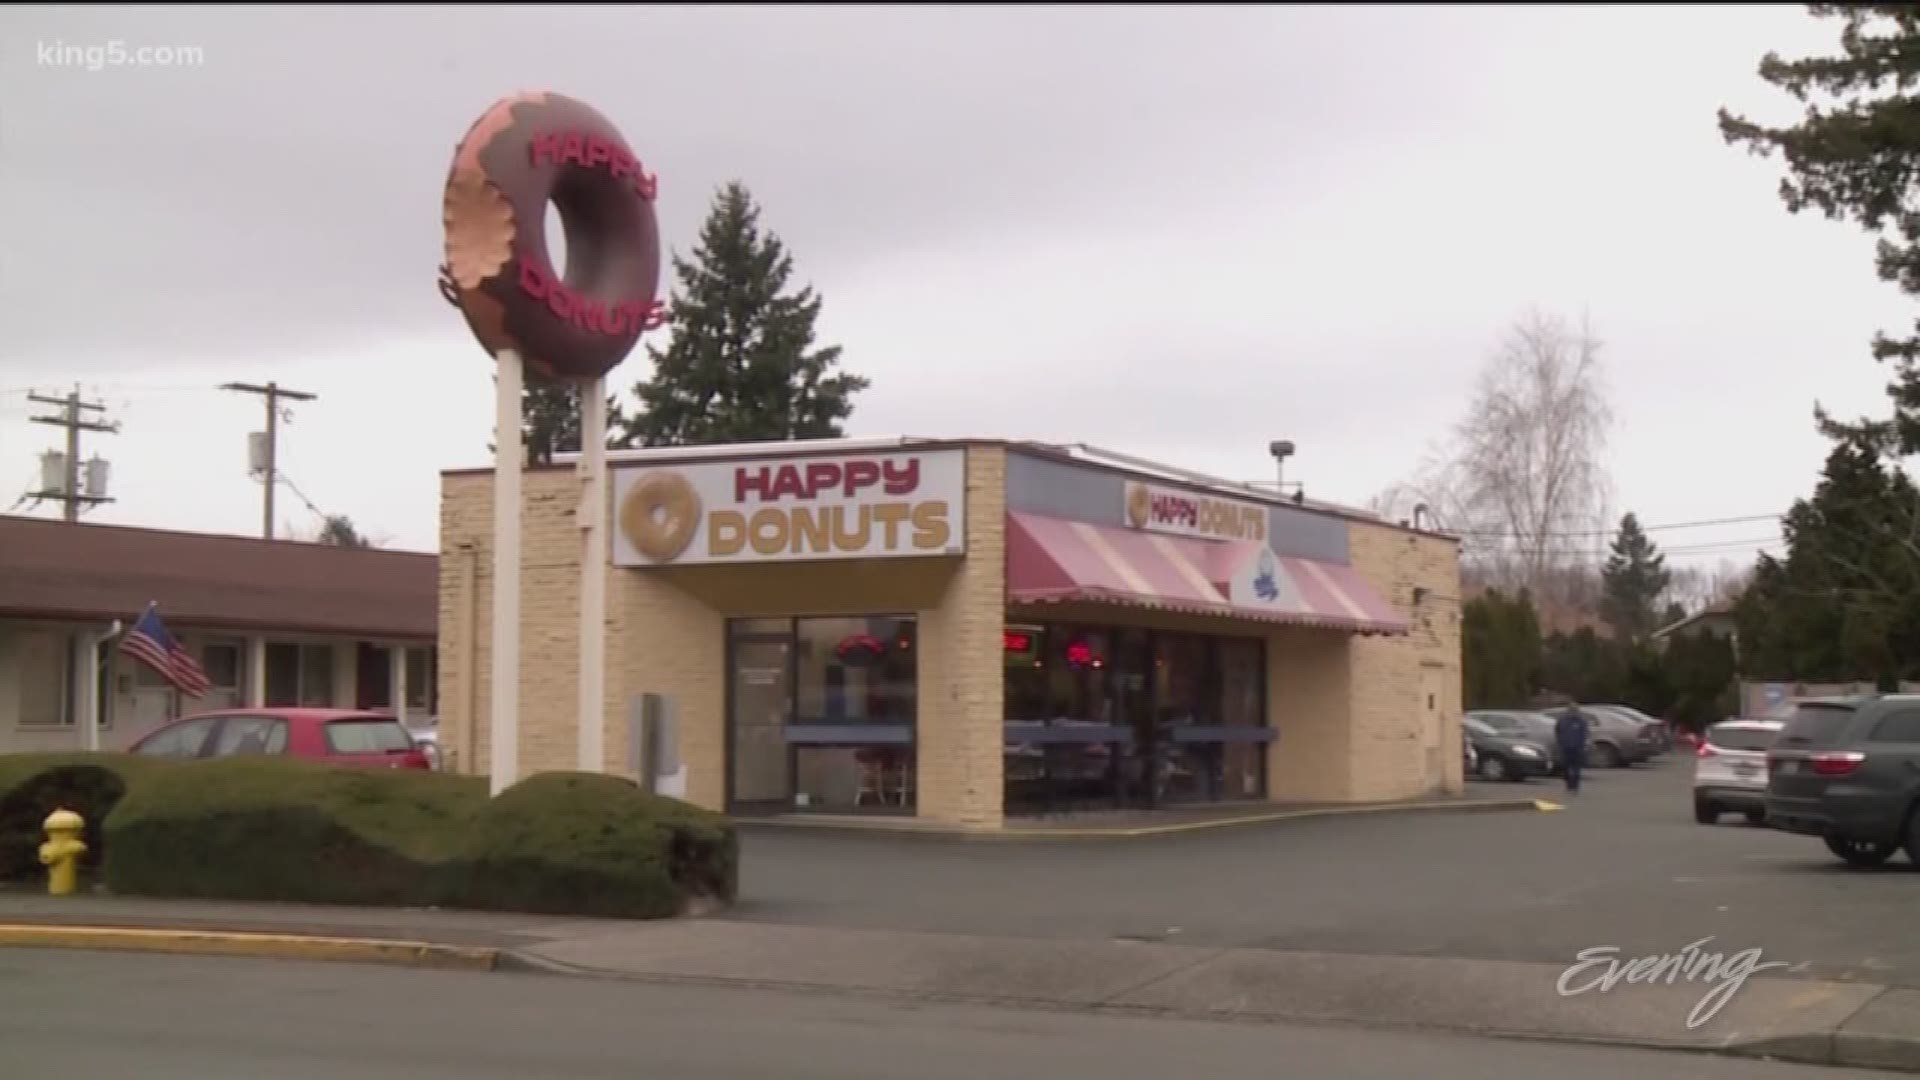 There's a very good reason the iconic bakery is called Happy Donuts.